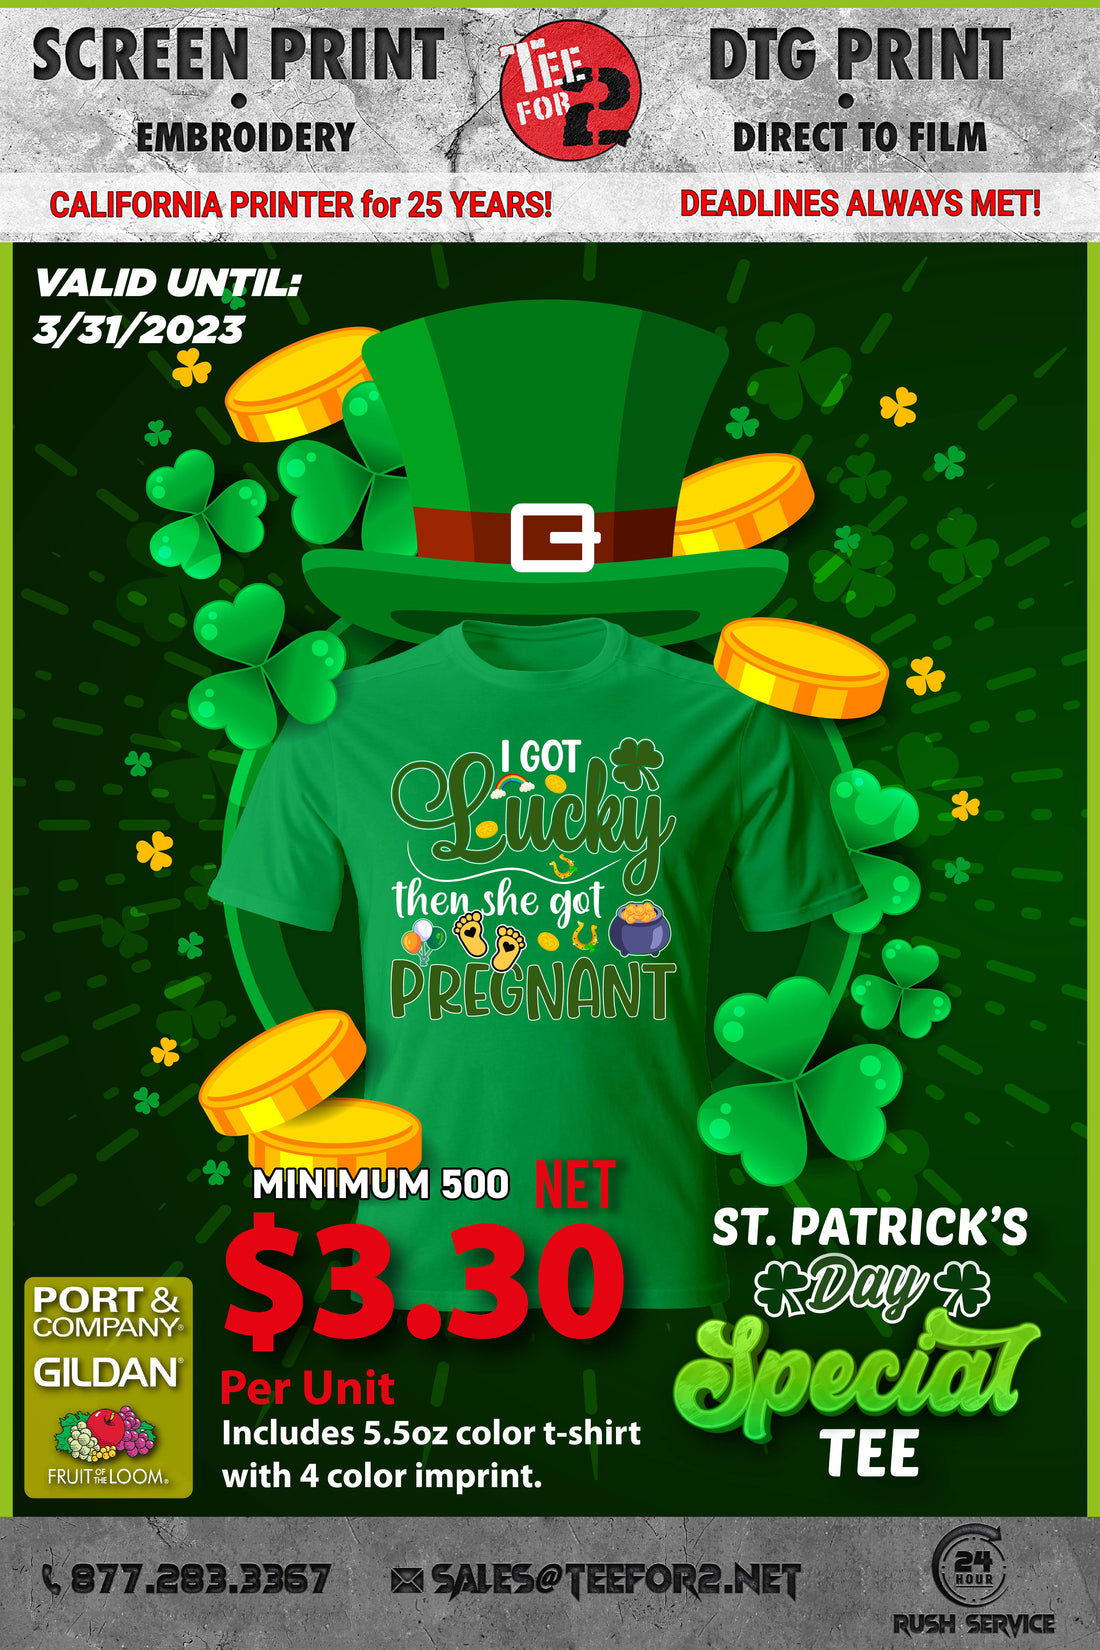 St Patty's Day Special